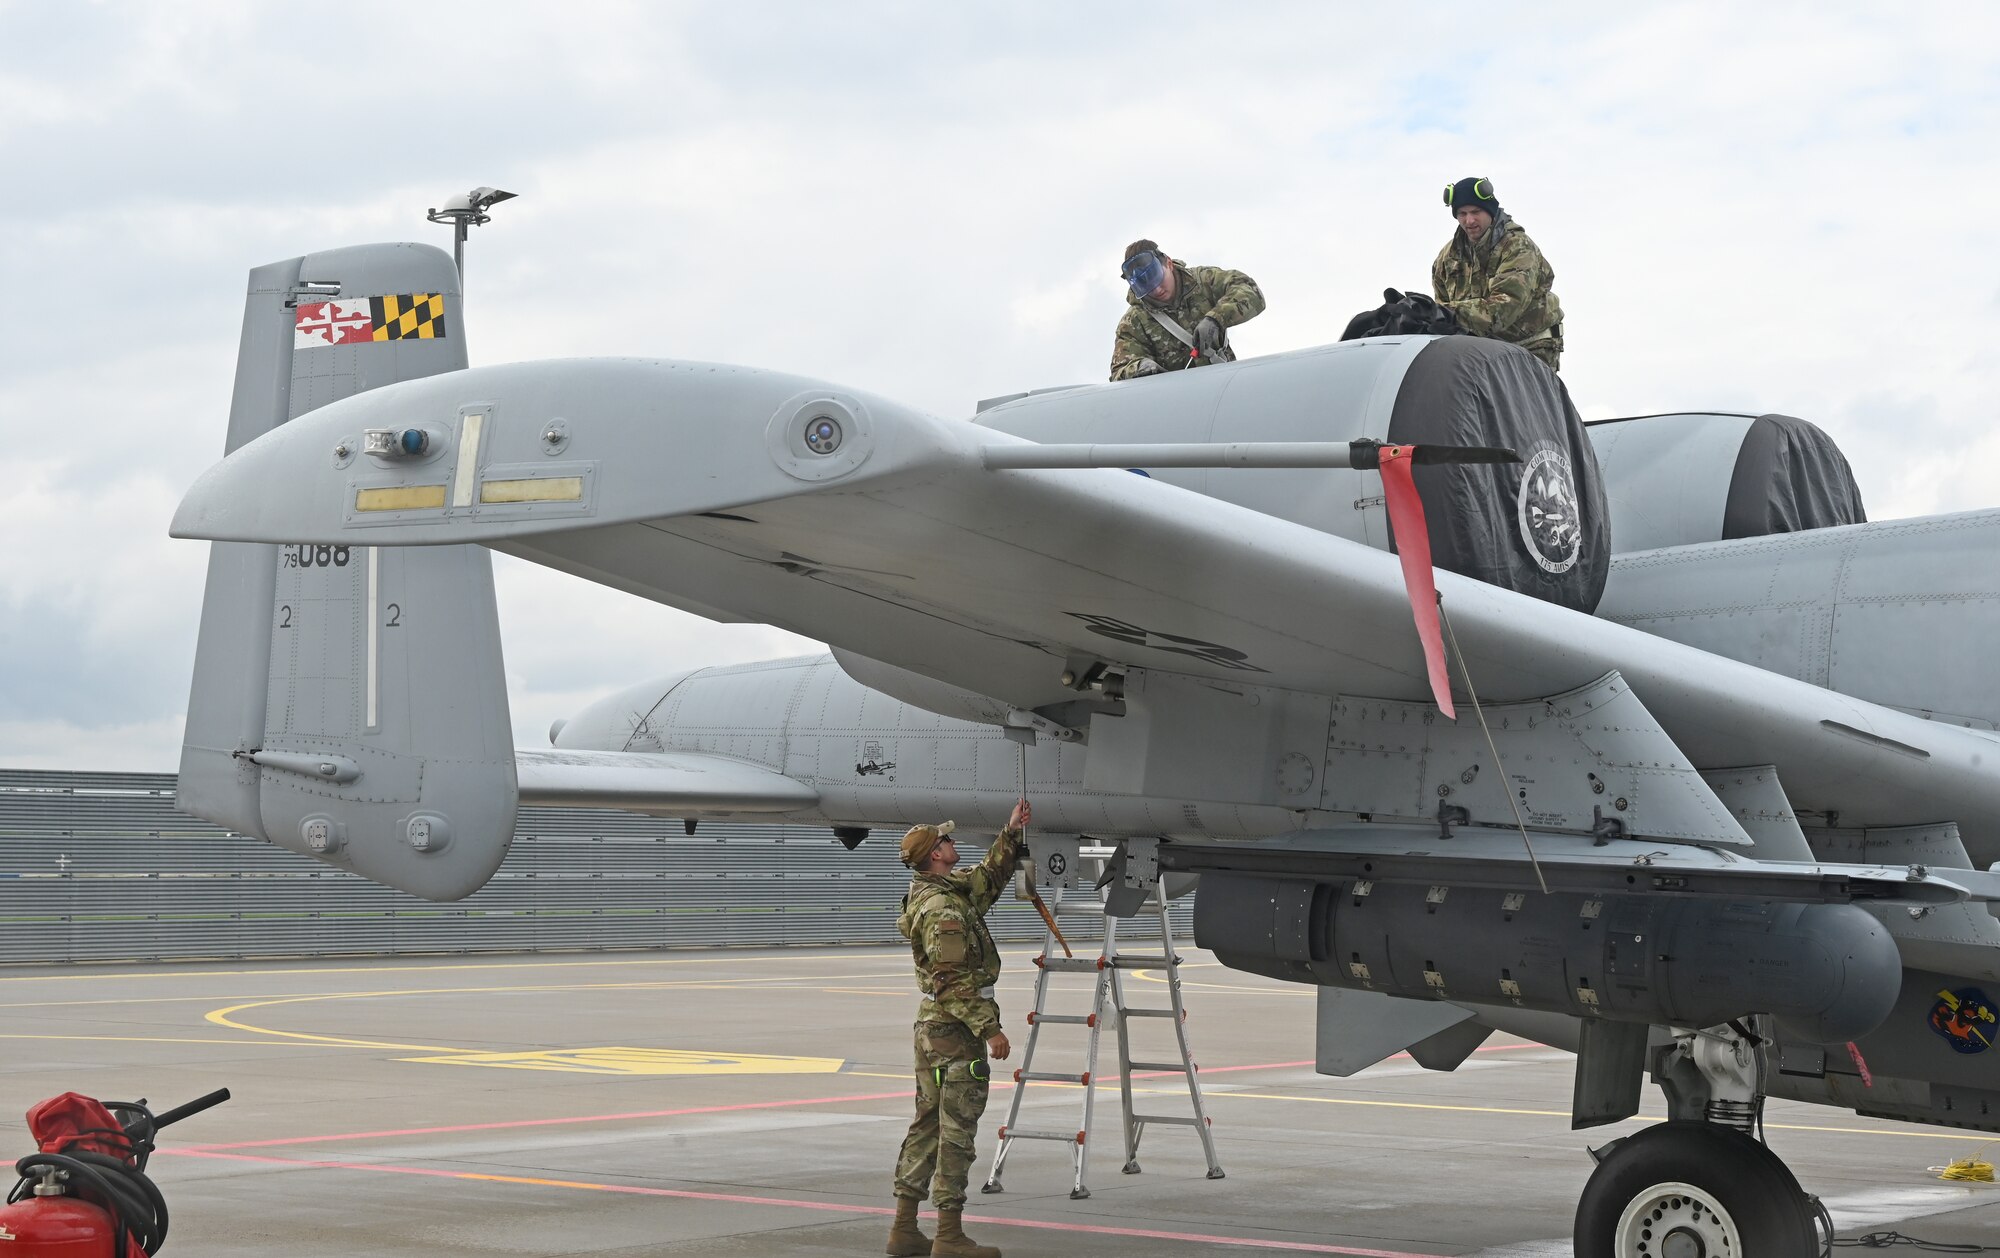 Airmen assigned to the 175th Aircraft Maintenance Squadron and 175th Maintenance Squadron, Maryland Air National Guard, inspect an A-10C Thunderbolt II aircraft after arrival at Lielvārde Air Base, located in the Vidzeme region of Latvia, May 14, 2022, for support and training while participating in DEFENDER-Europe 22.